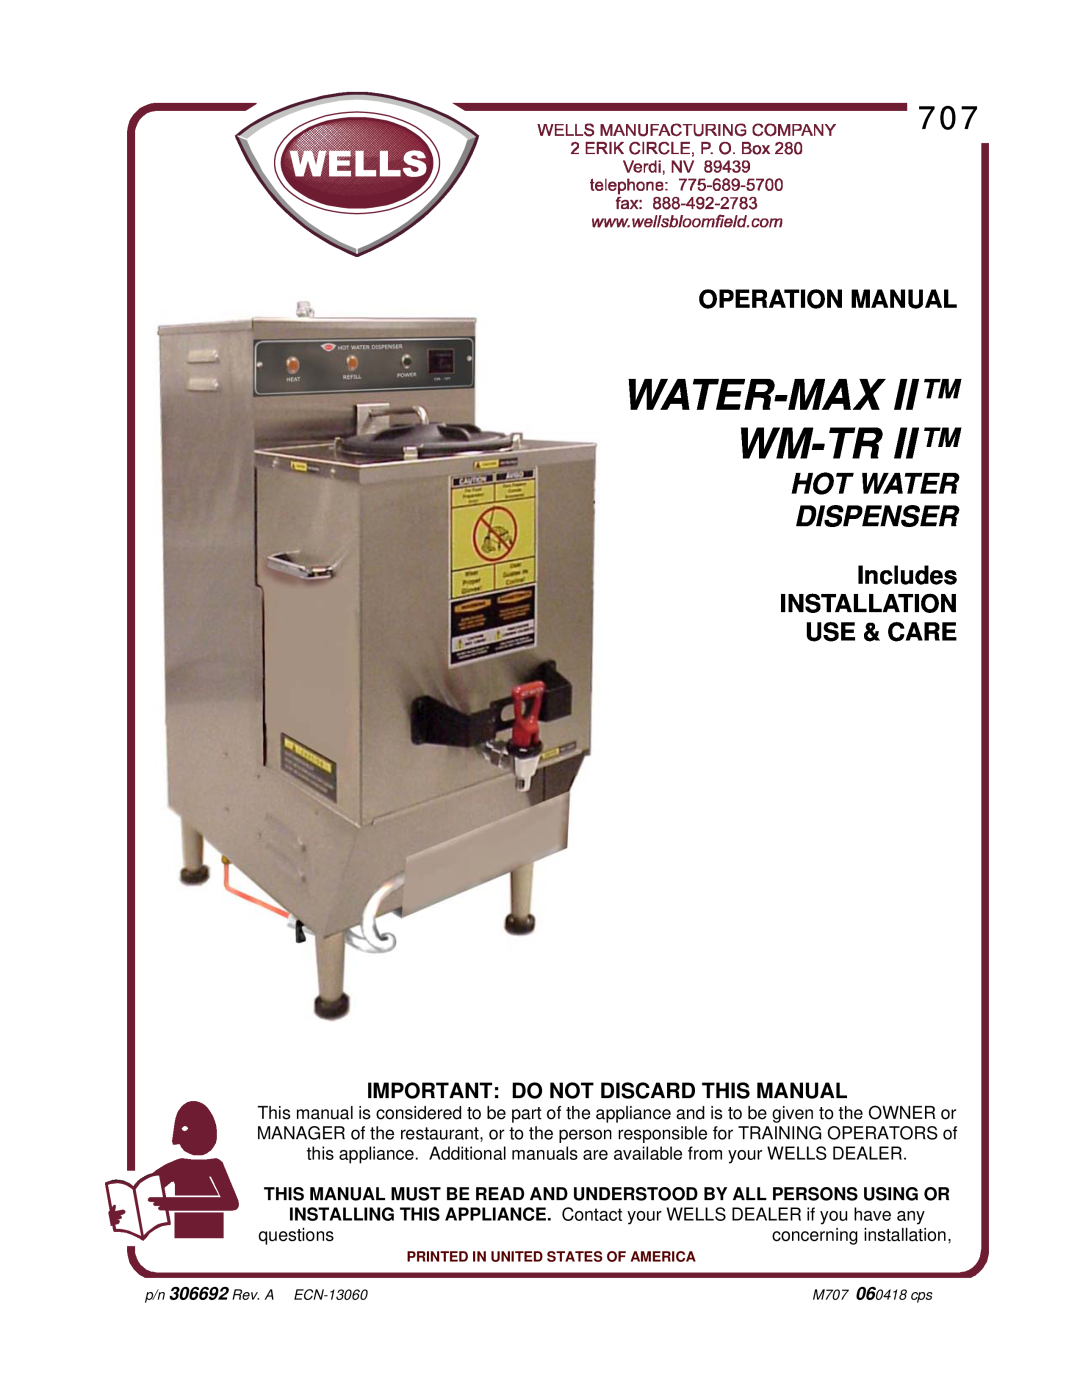 Wells WM-TR II operation manual Important Do Not Discard This Manual, questions, concerning installation, Water-Max Wm-Tr 